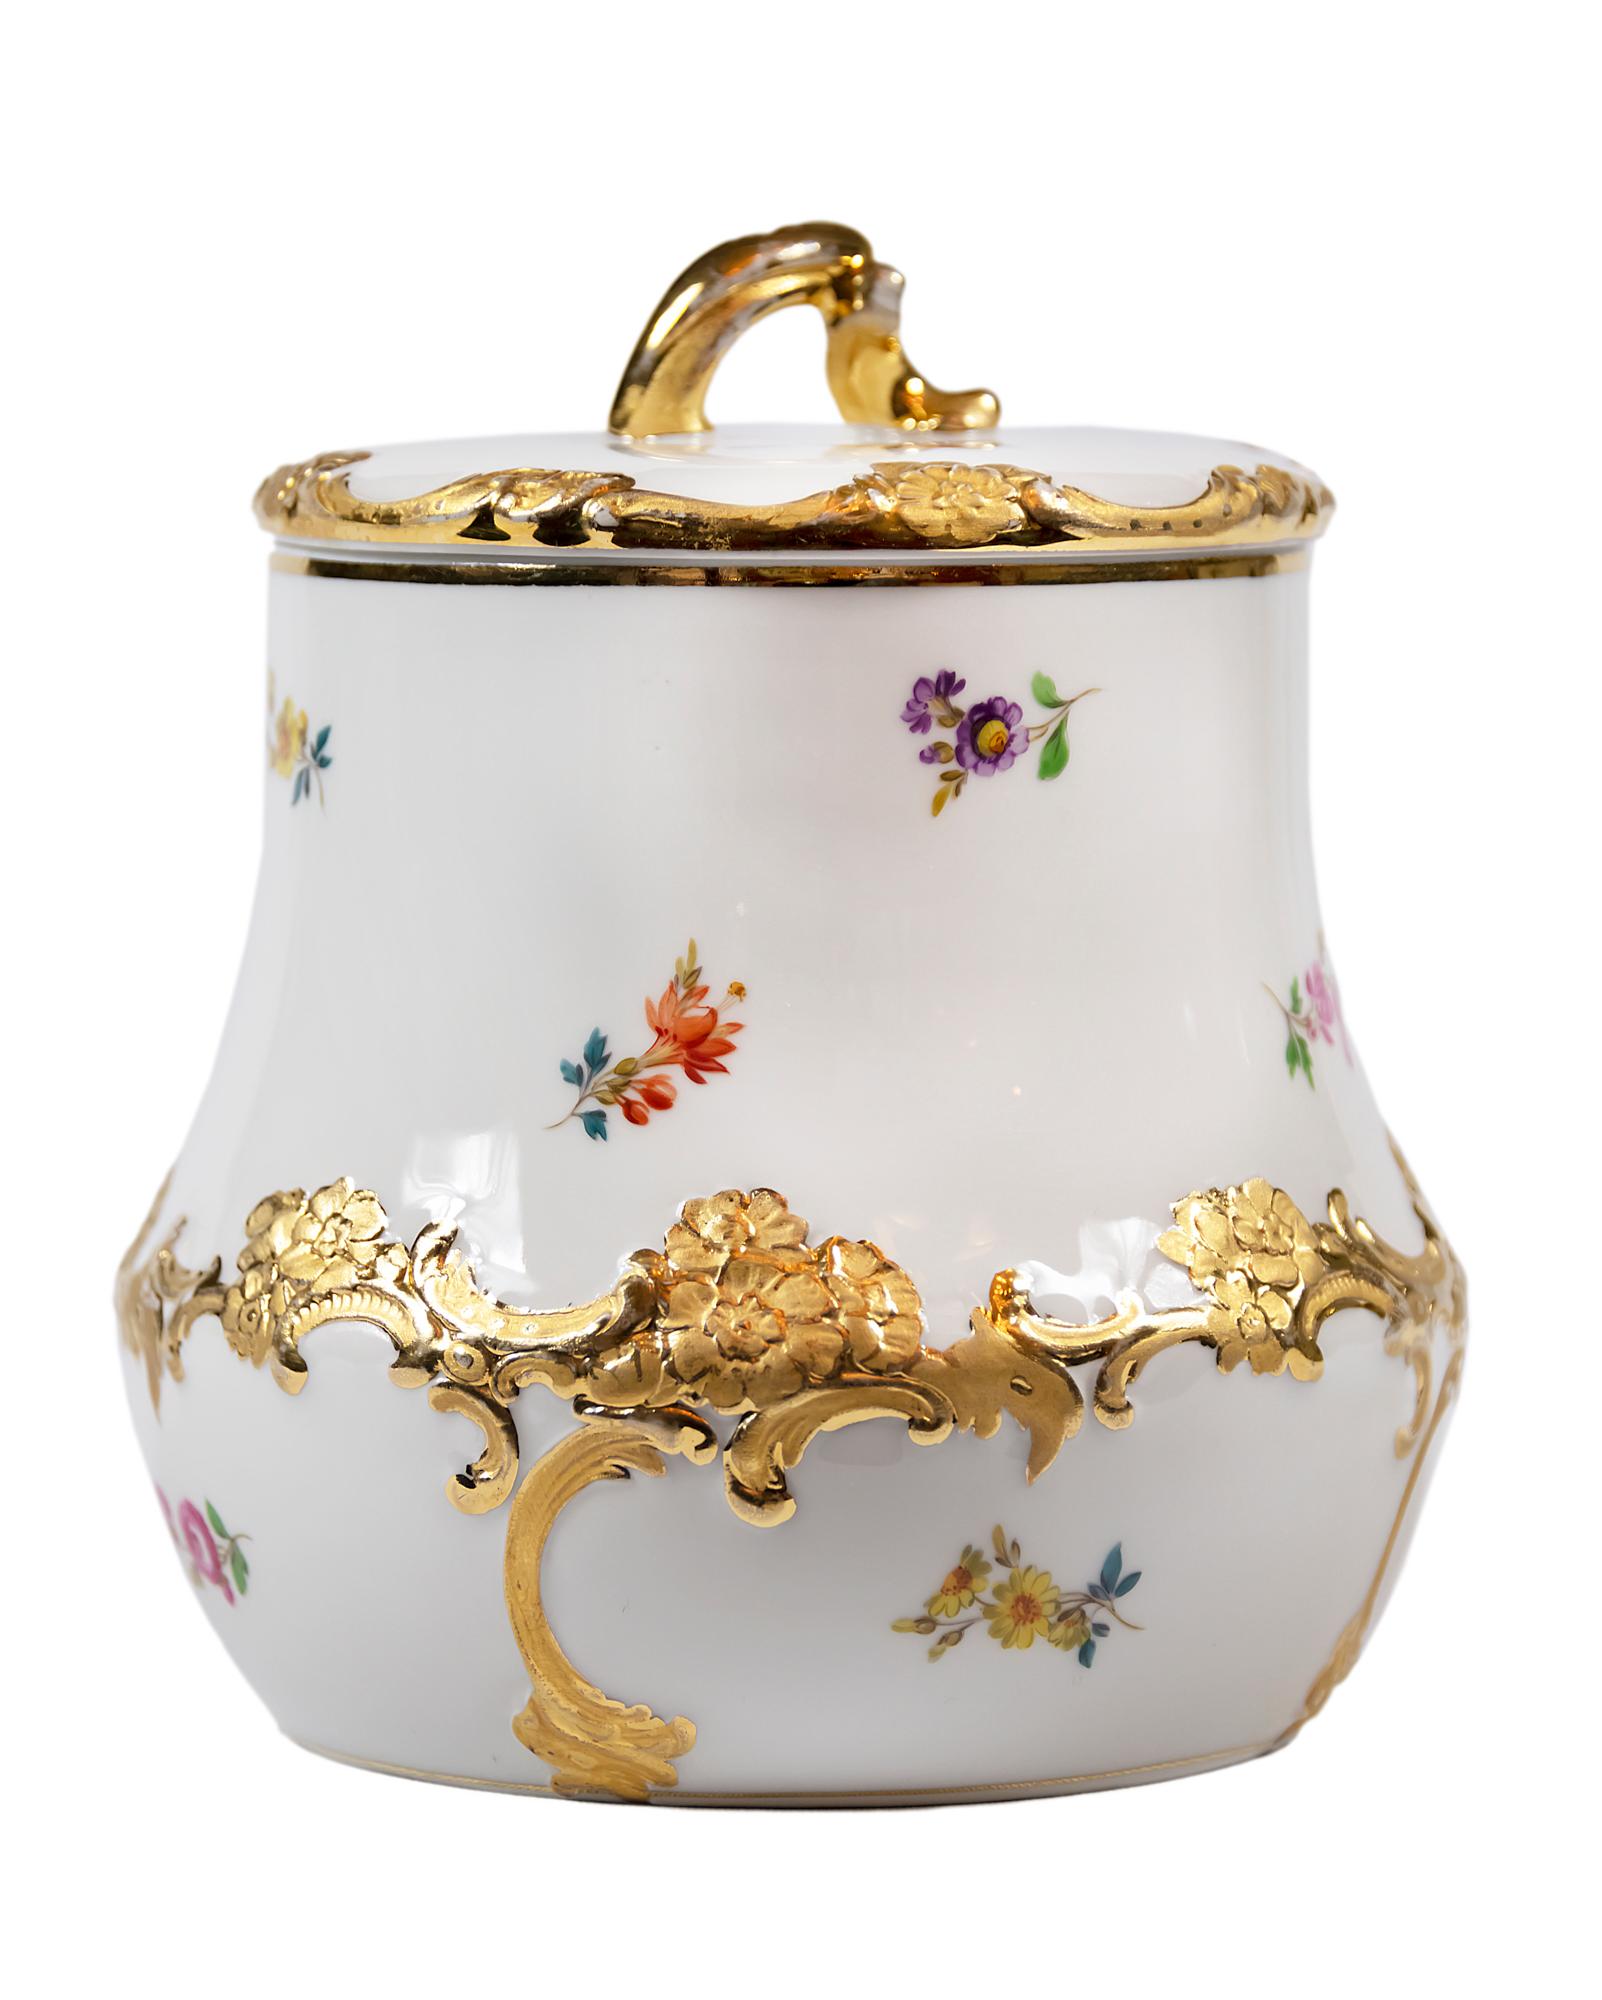 Meissen porcelain cookie jar with lid, hand painted flowers and gold decor.
 